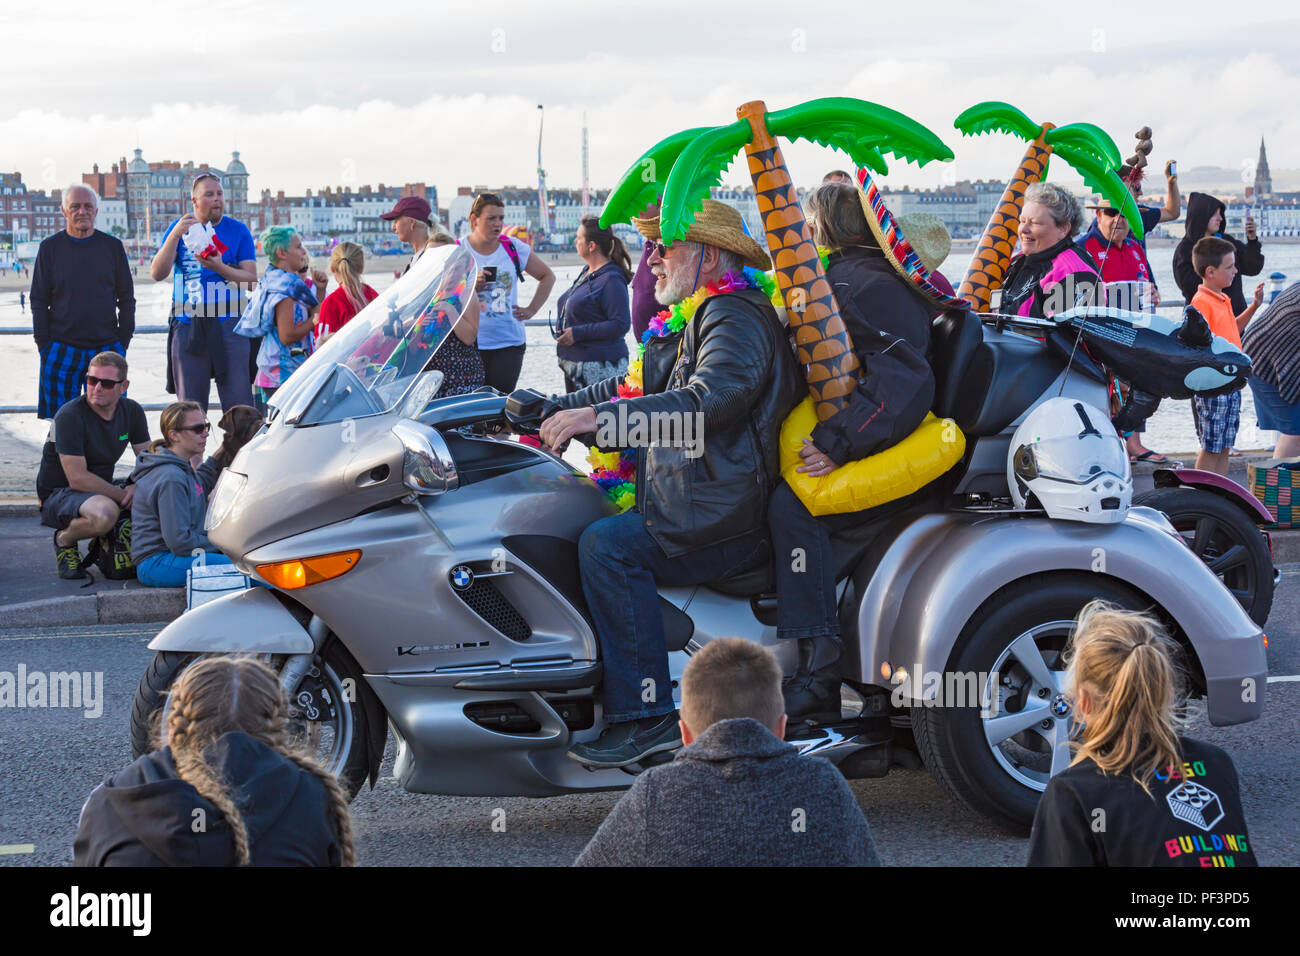 Couple riding with inflatable palm trees on BMW motorbike taking part in the annual carnival procession parade at Weymouth, Dorset UK in August Stock Photo